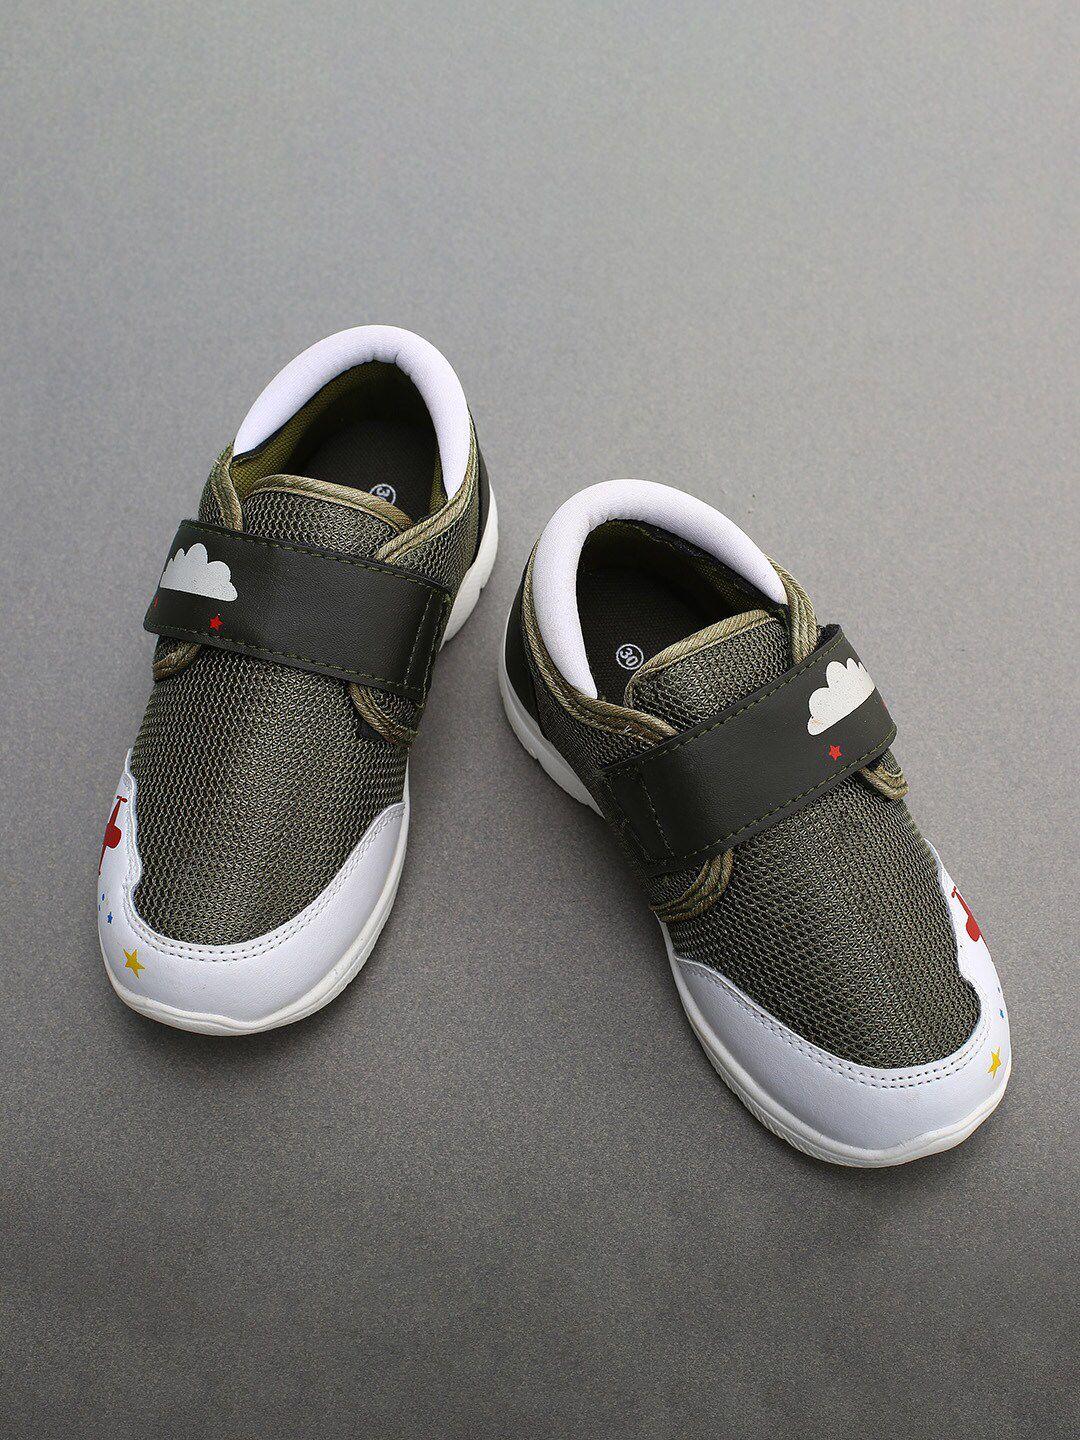 fame-forever-by-lifestyle-boys-synthetic-velcro-casual-sneakers